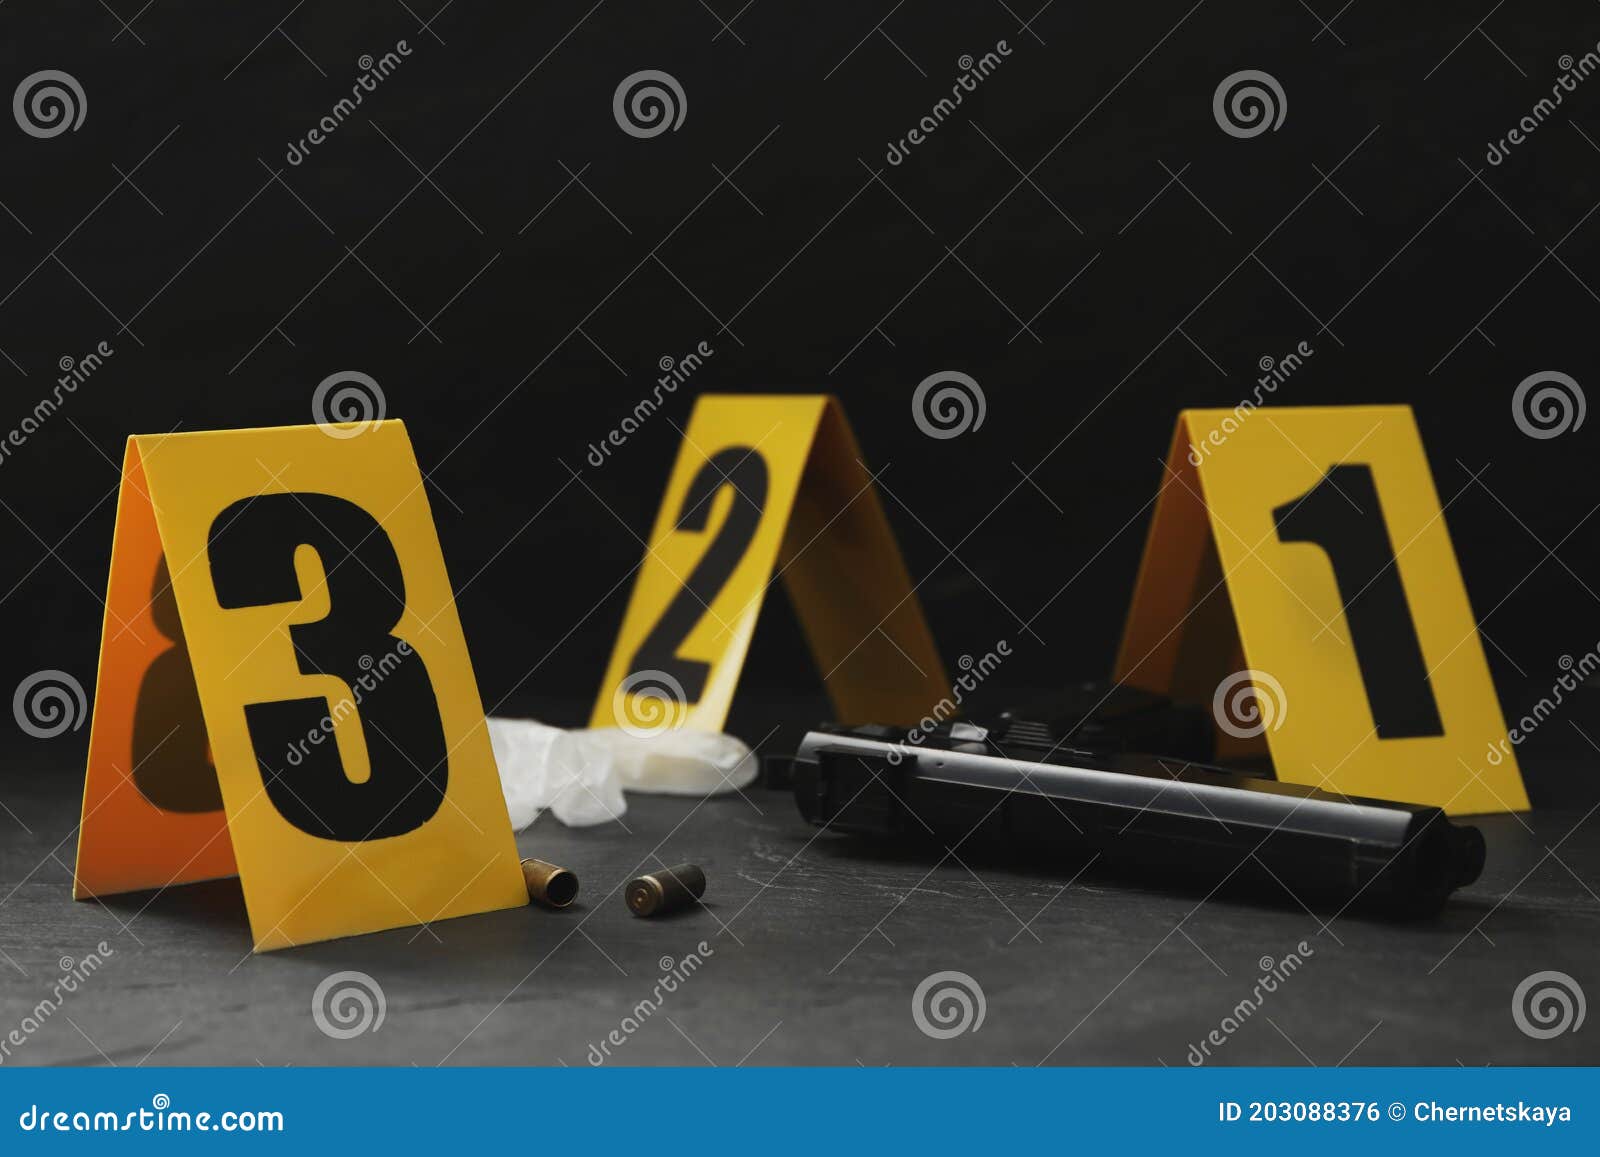 crime scene markers and evidences on black background